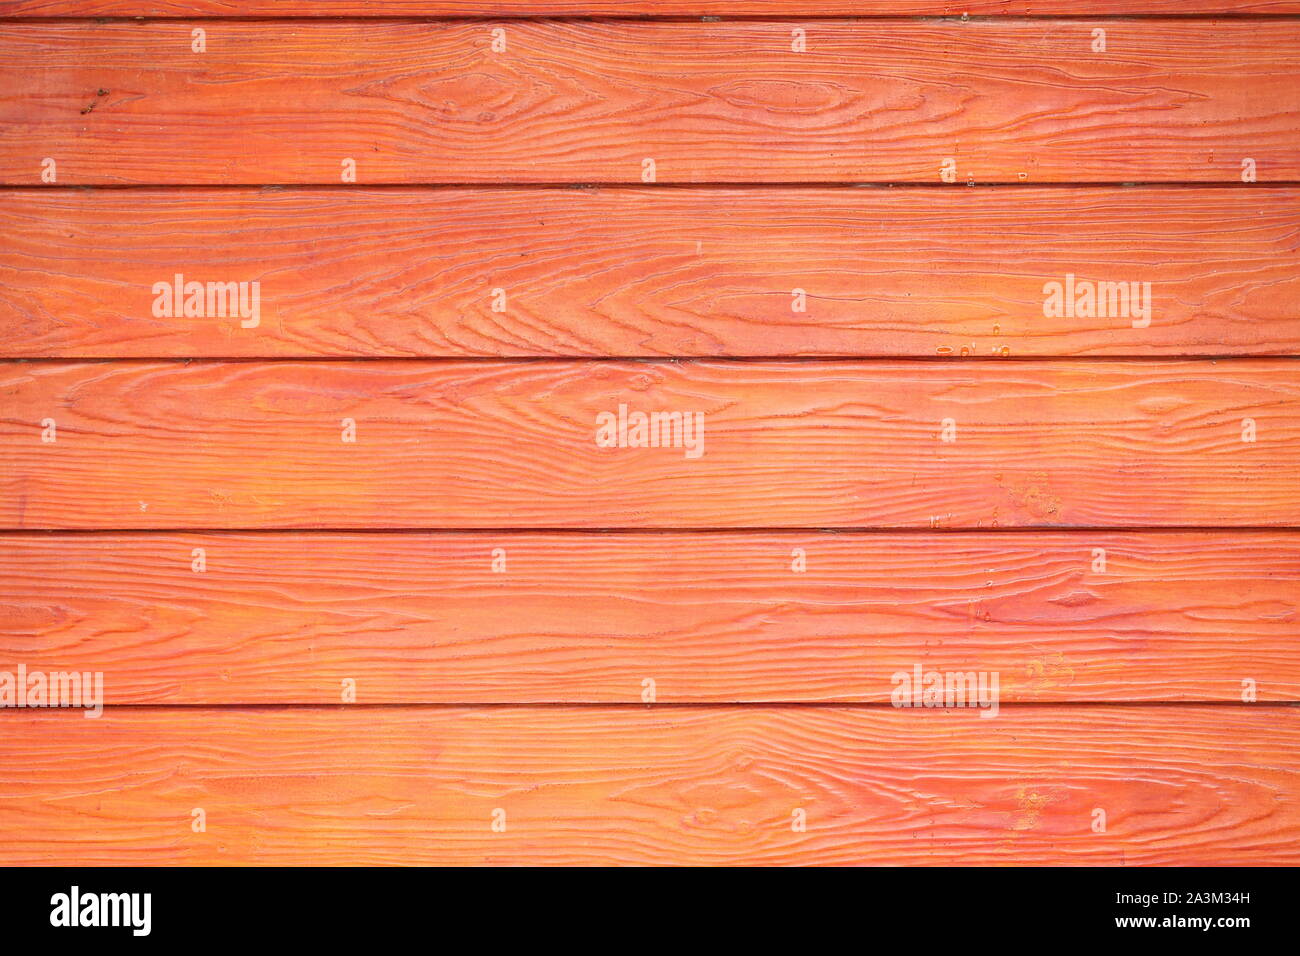 Red brown wood plank wall, Abstract background and texture from wooden board Stock Photo